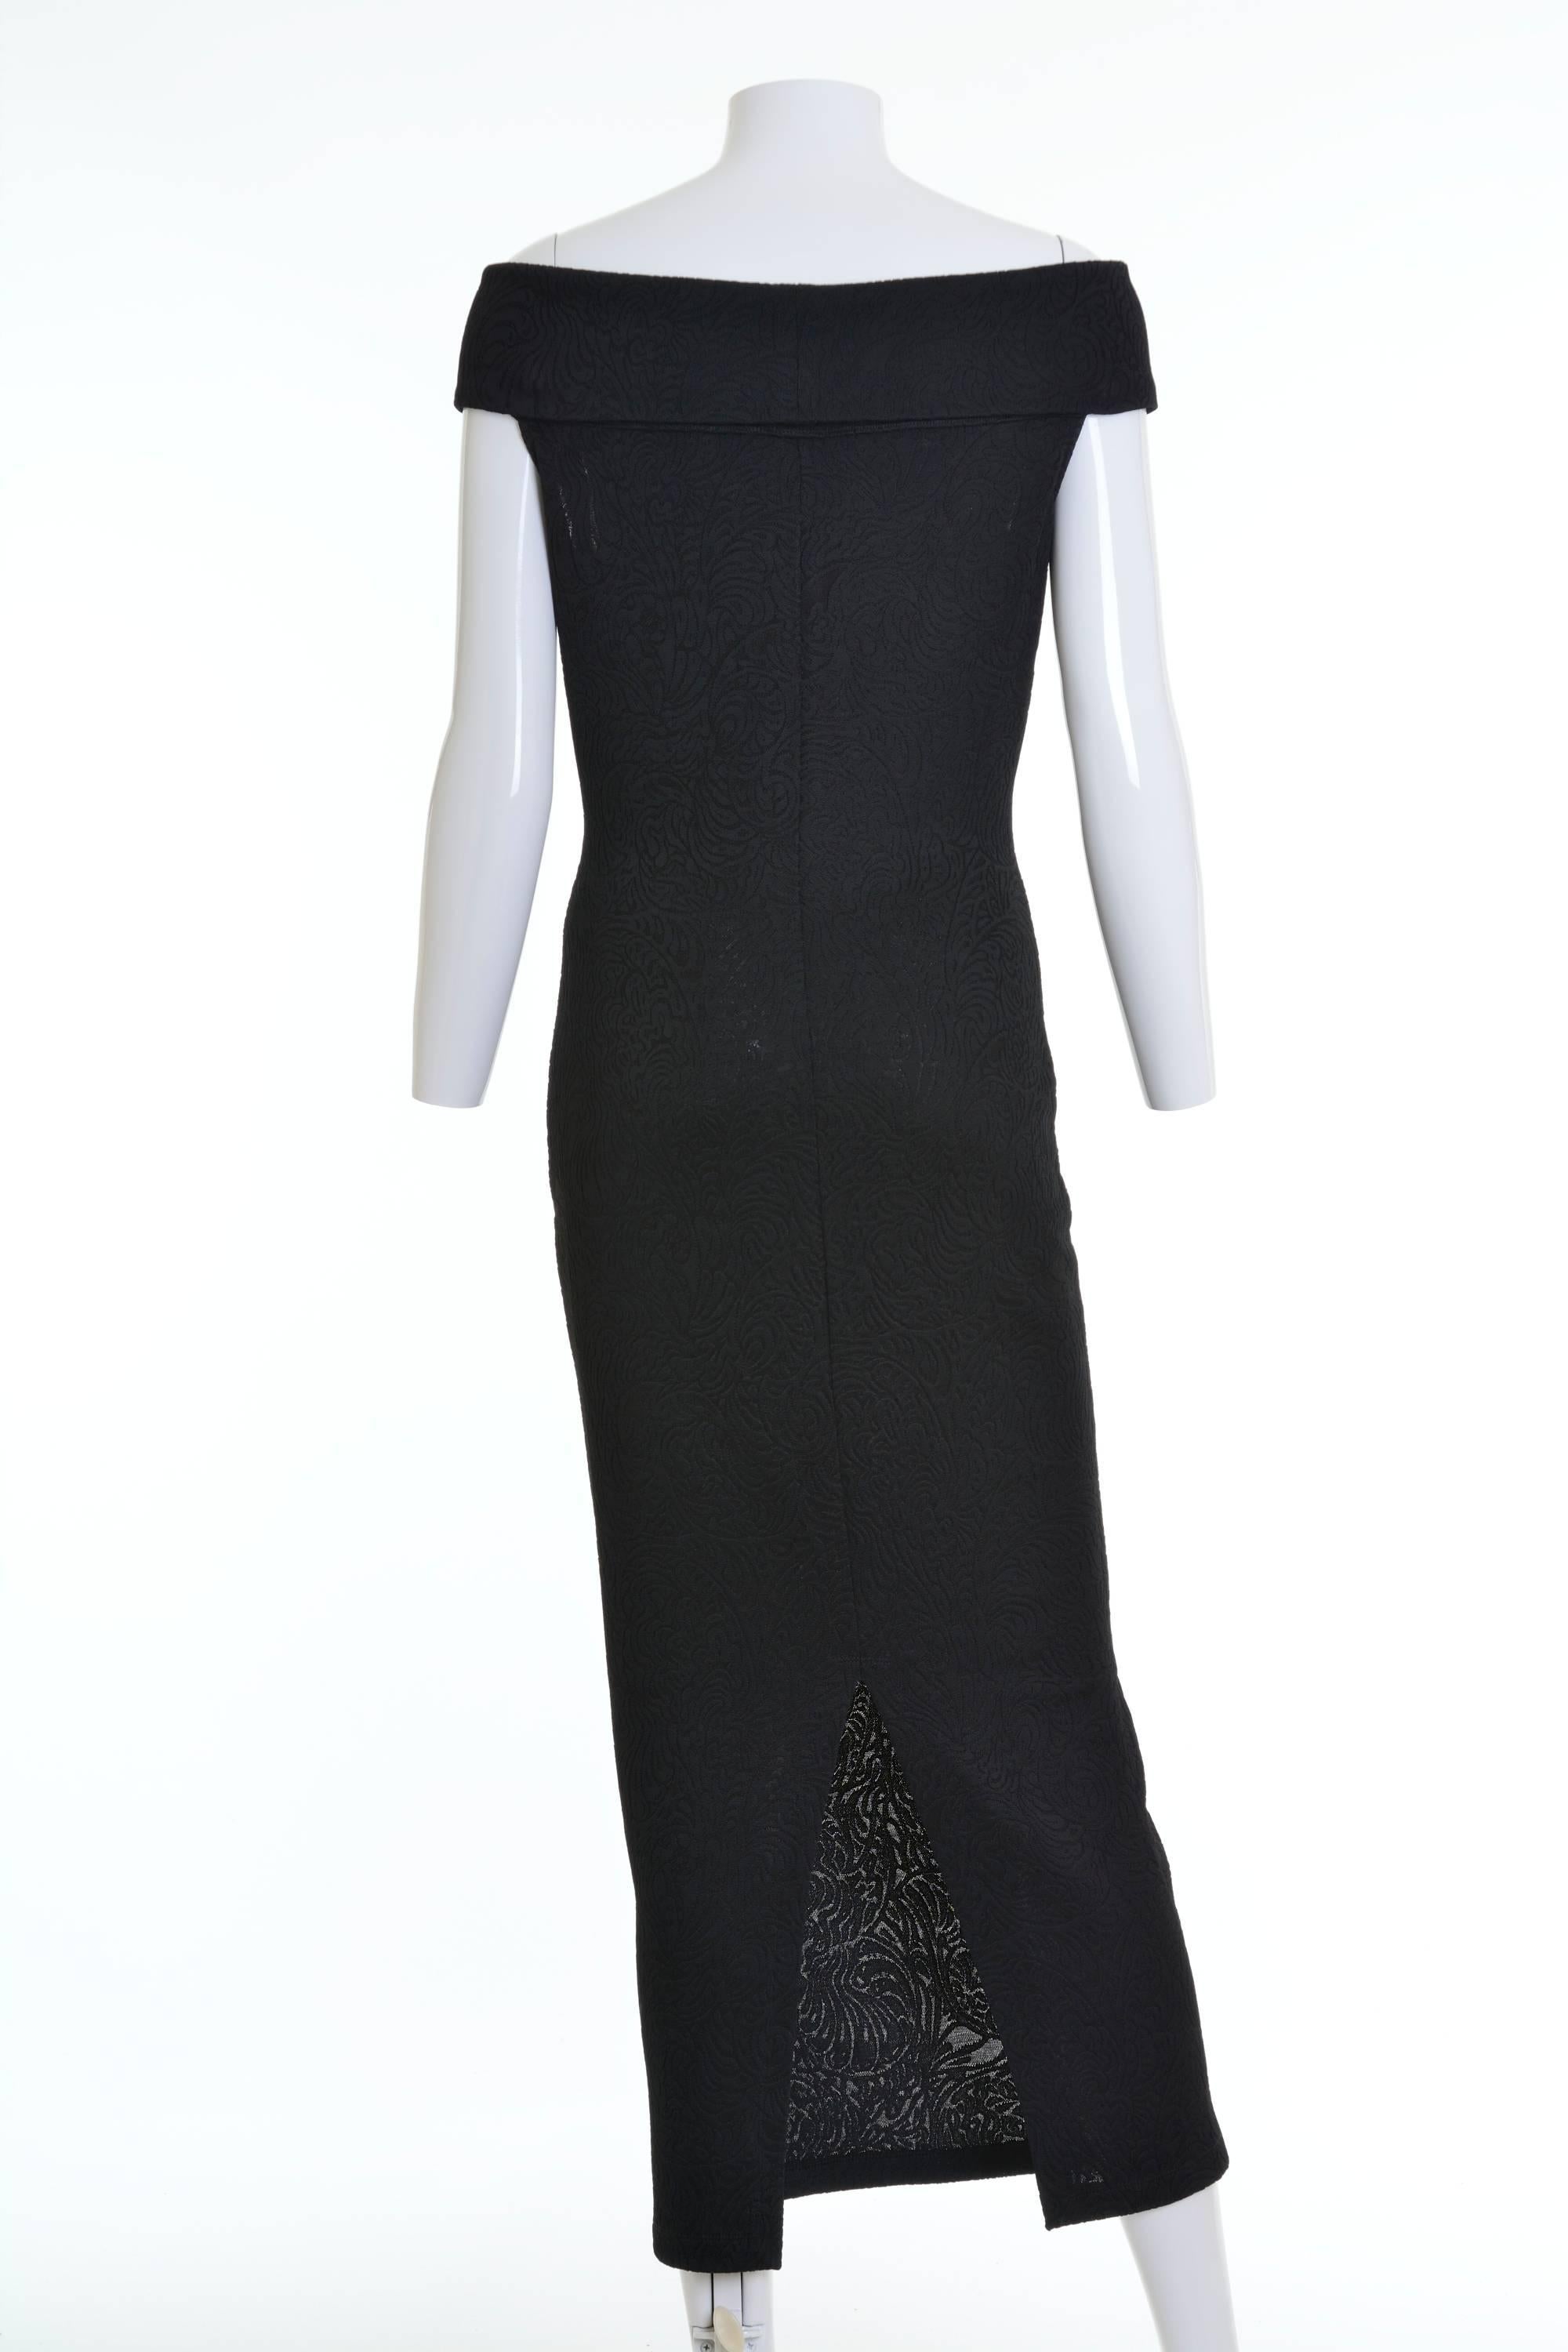 This gorgeous and sexy Gianni Versace dress is in black sheer knitted stretch fabric. It has off shoulder and back slit.

Good vintage condition

Label: Versus by Gianni Versace - Made in Italy
Fabric: rayon/alastan/polyamide
Color :